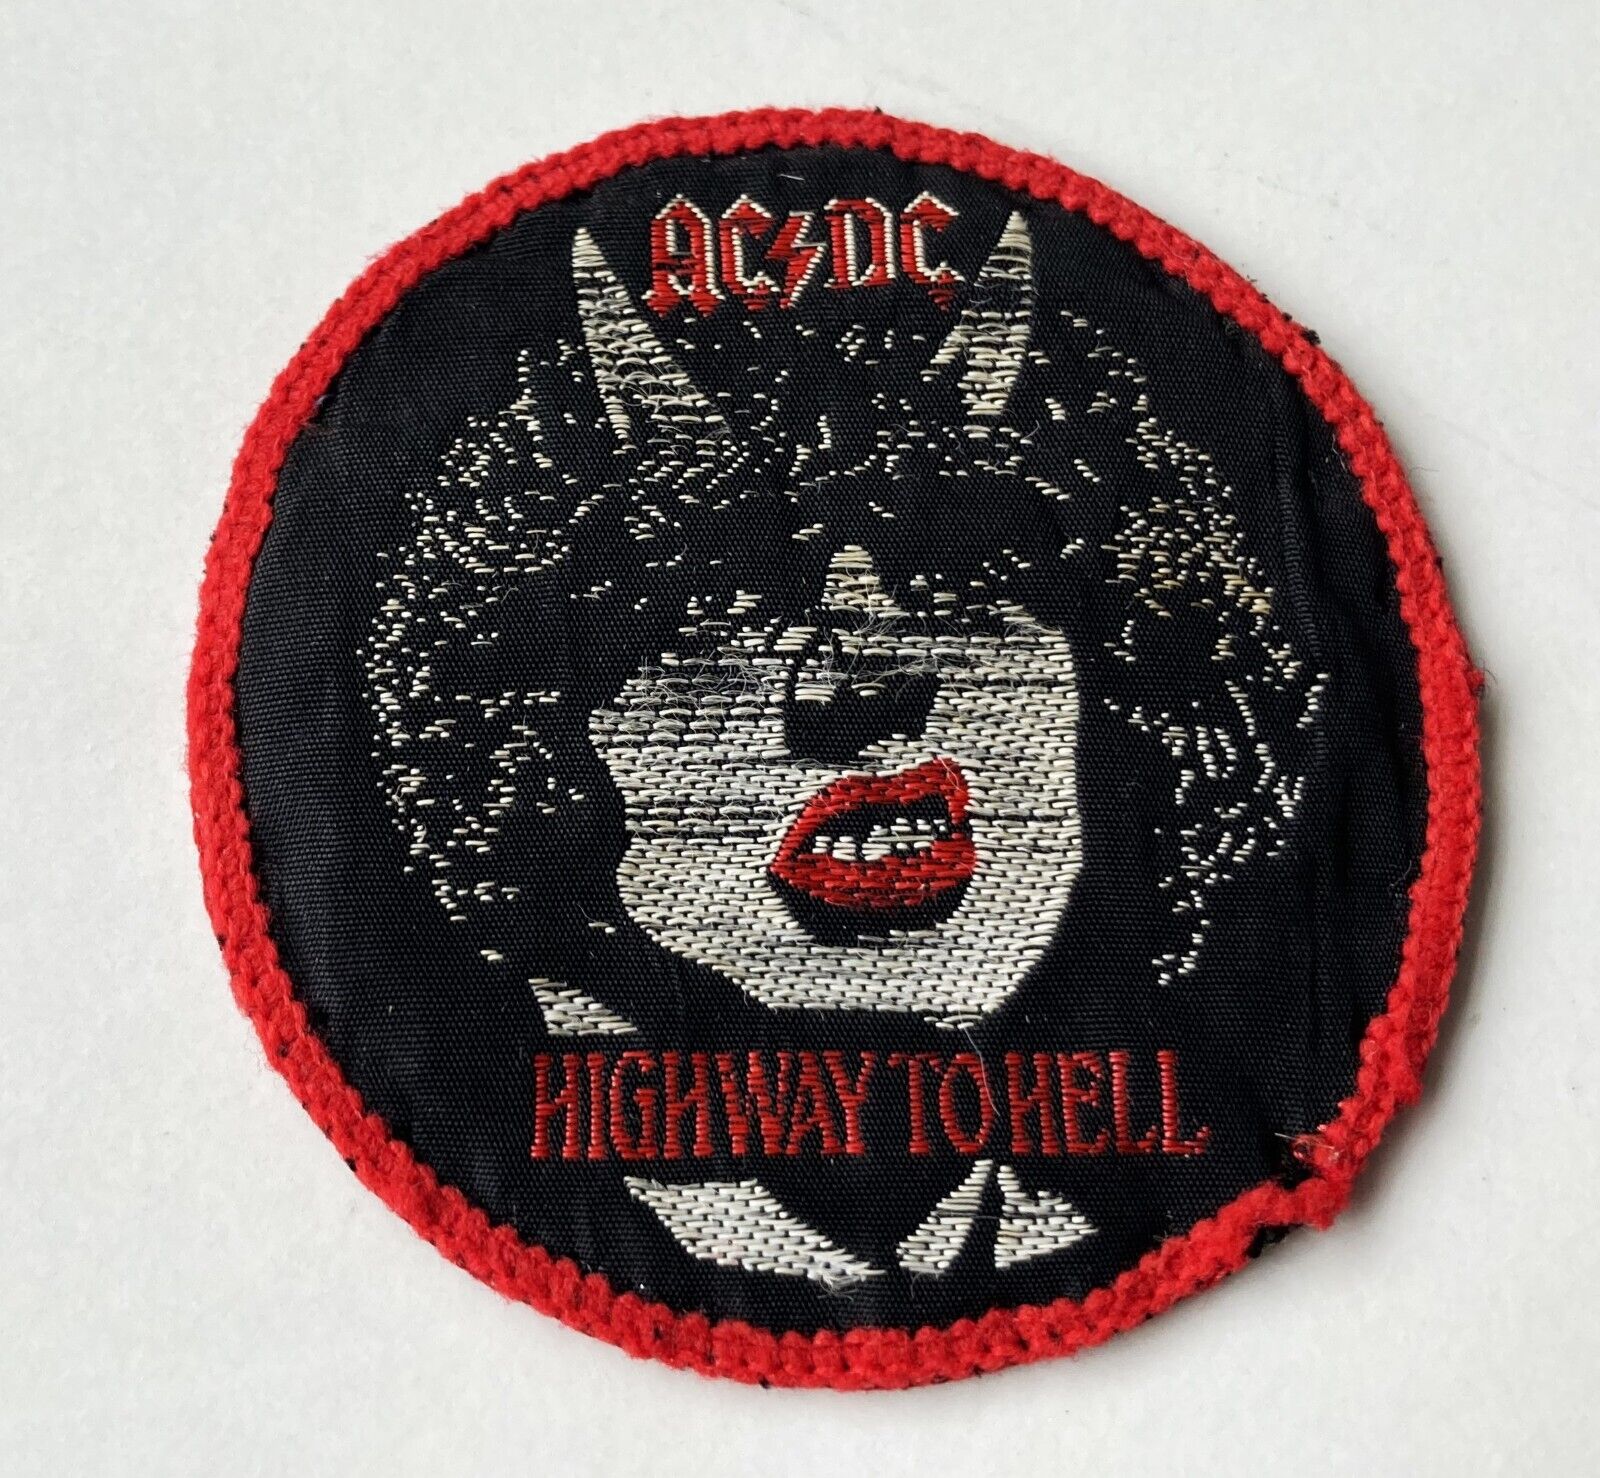 AC/DC HIGHWAY TO HELL VINTAGE SEW ON PATCH FROM THE 1980\'s ANGUS YOUNG VG